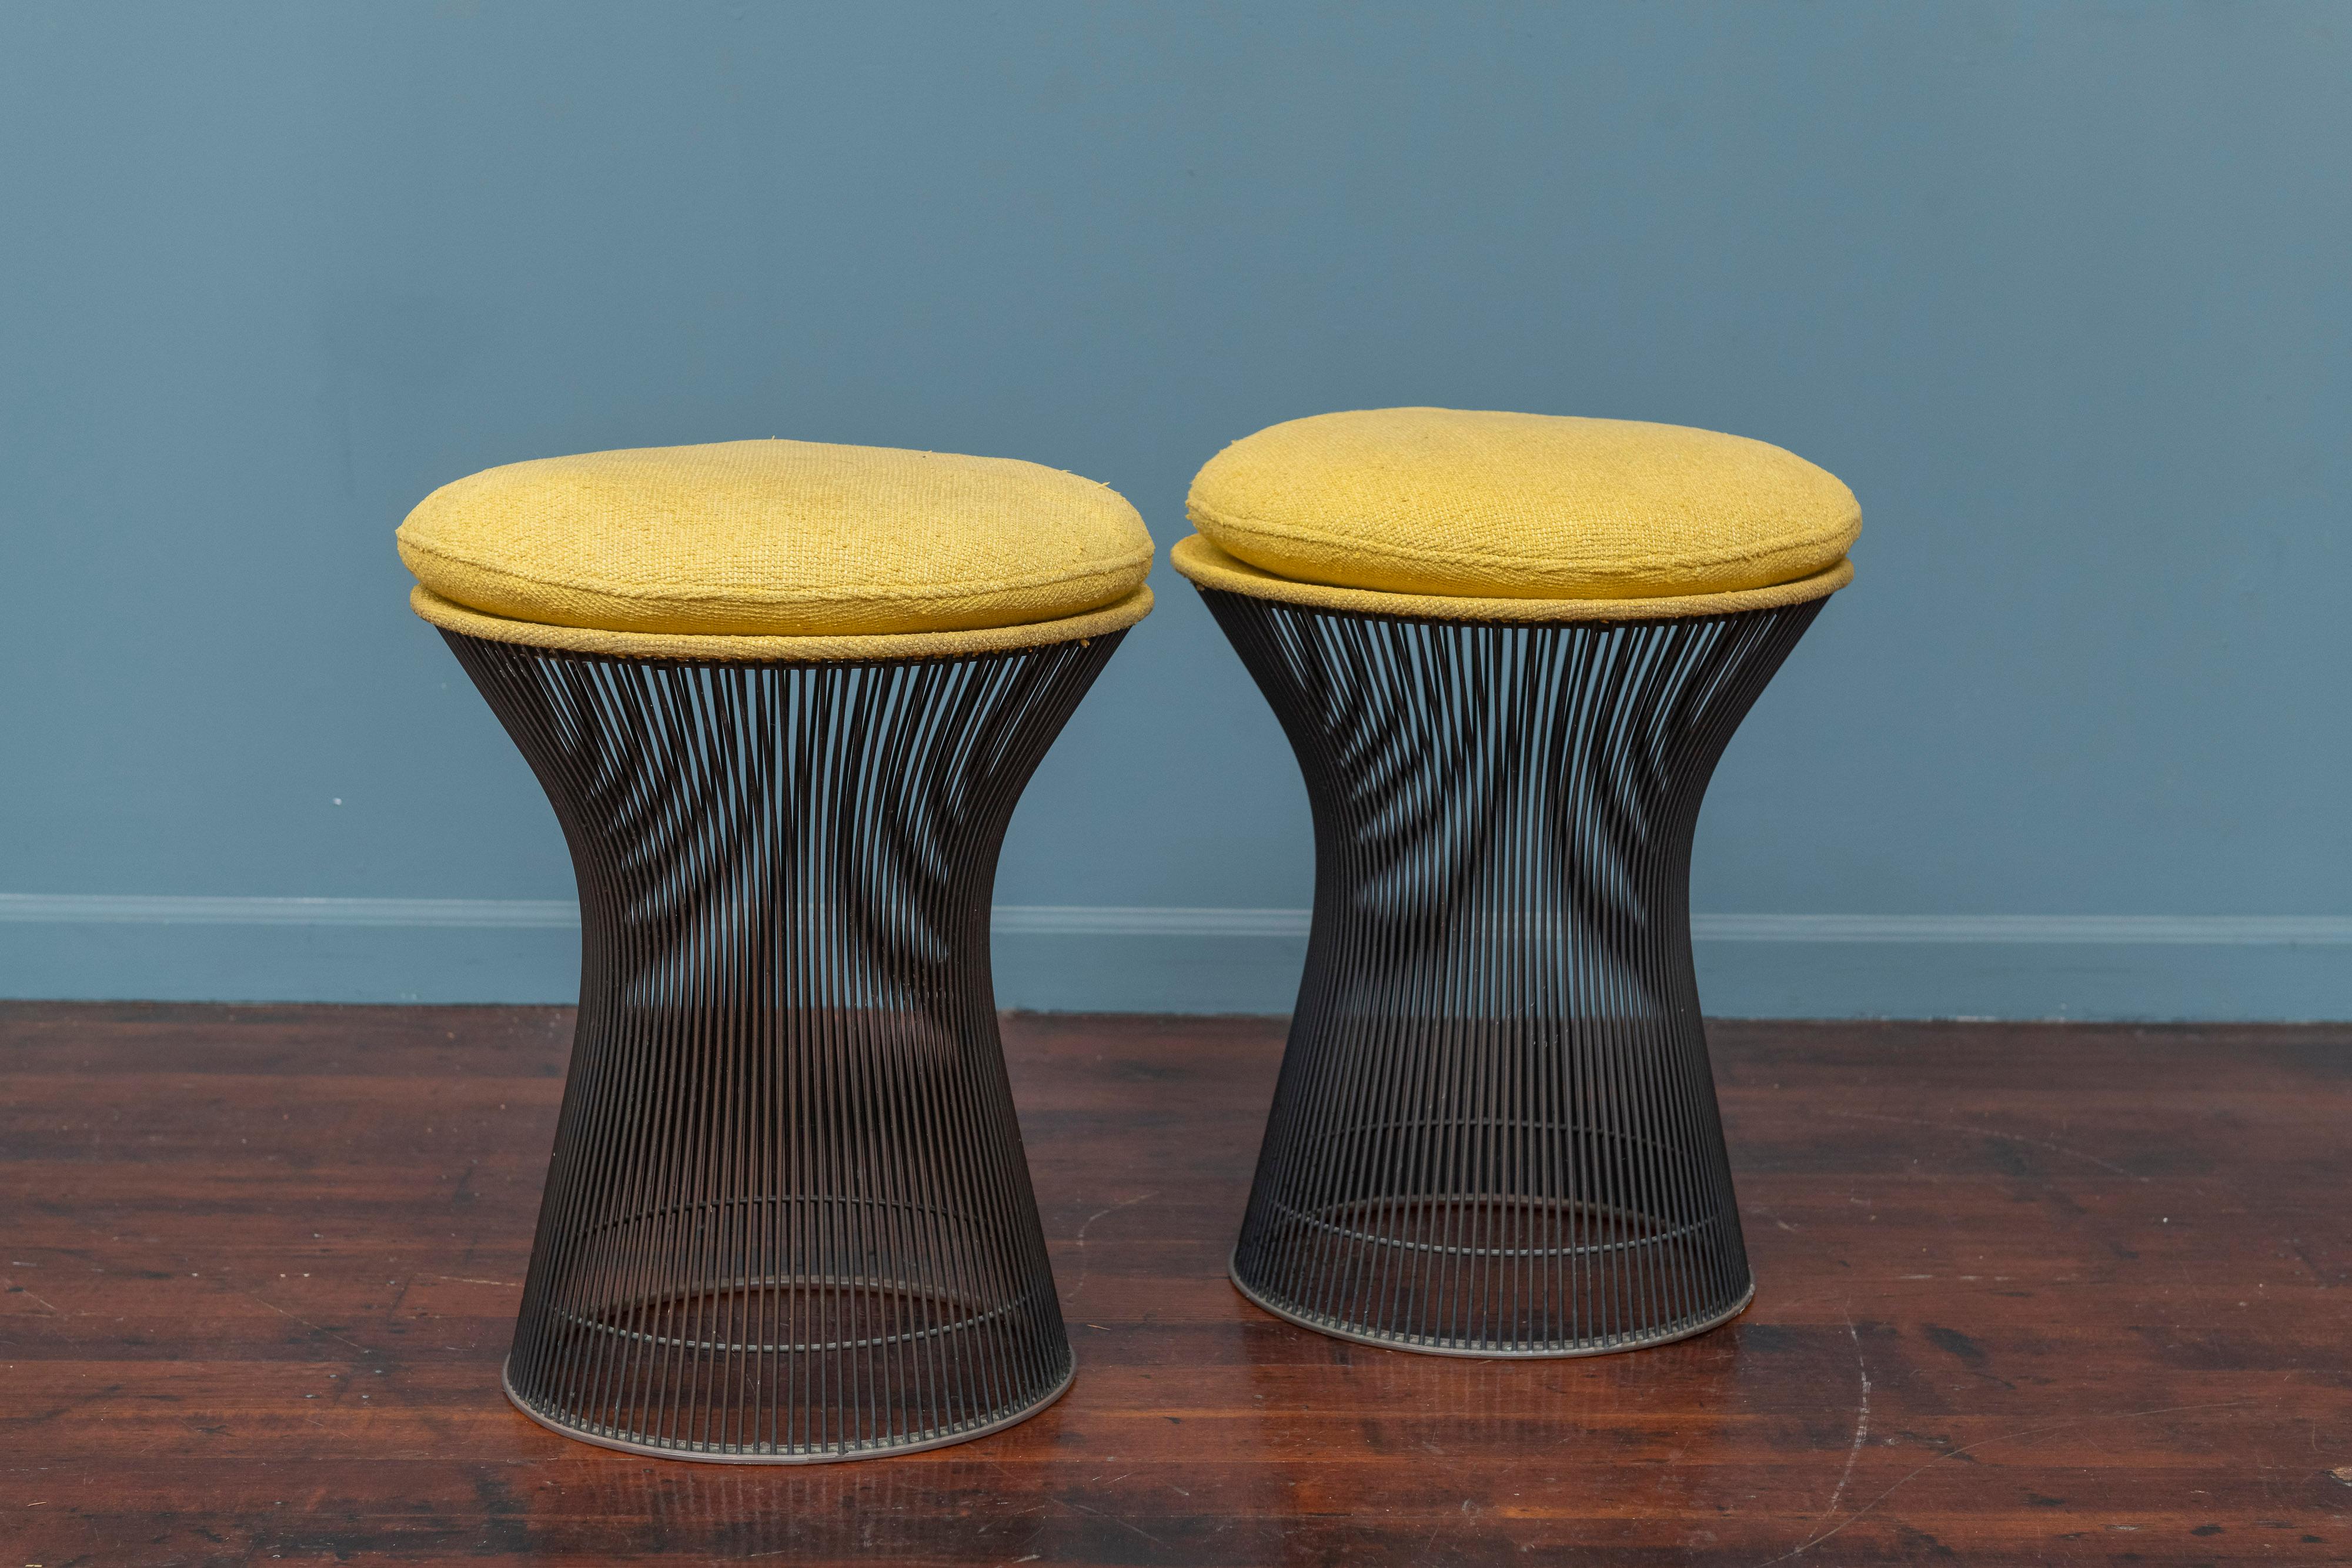 Warren Platner design stools for Knoll Furniture Co. Rare pair of bronze finish stools with original upholstery that is usable as-is but would benefit from new upholstery. Iconic design that has stood the test of time as contemporary furniture that